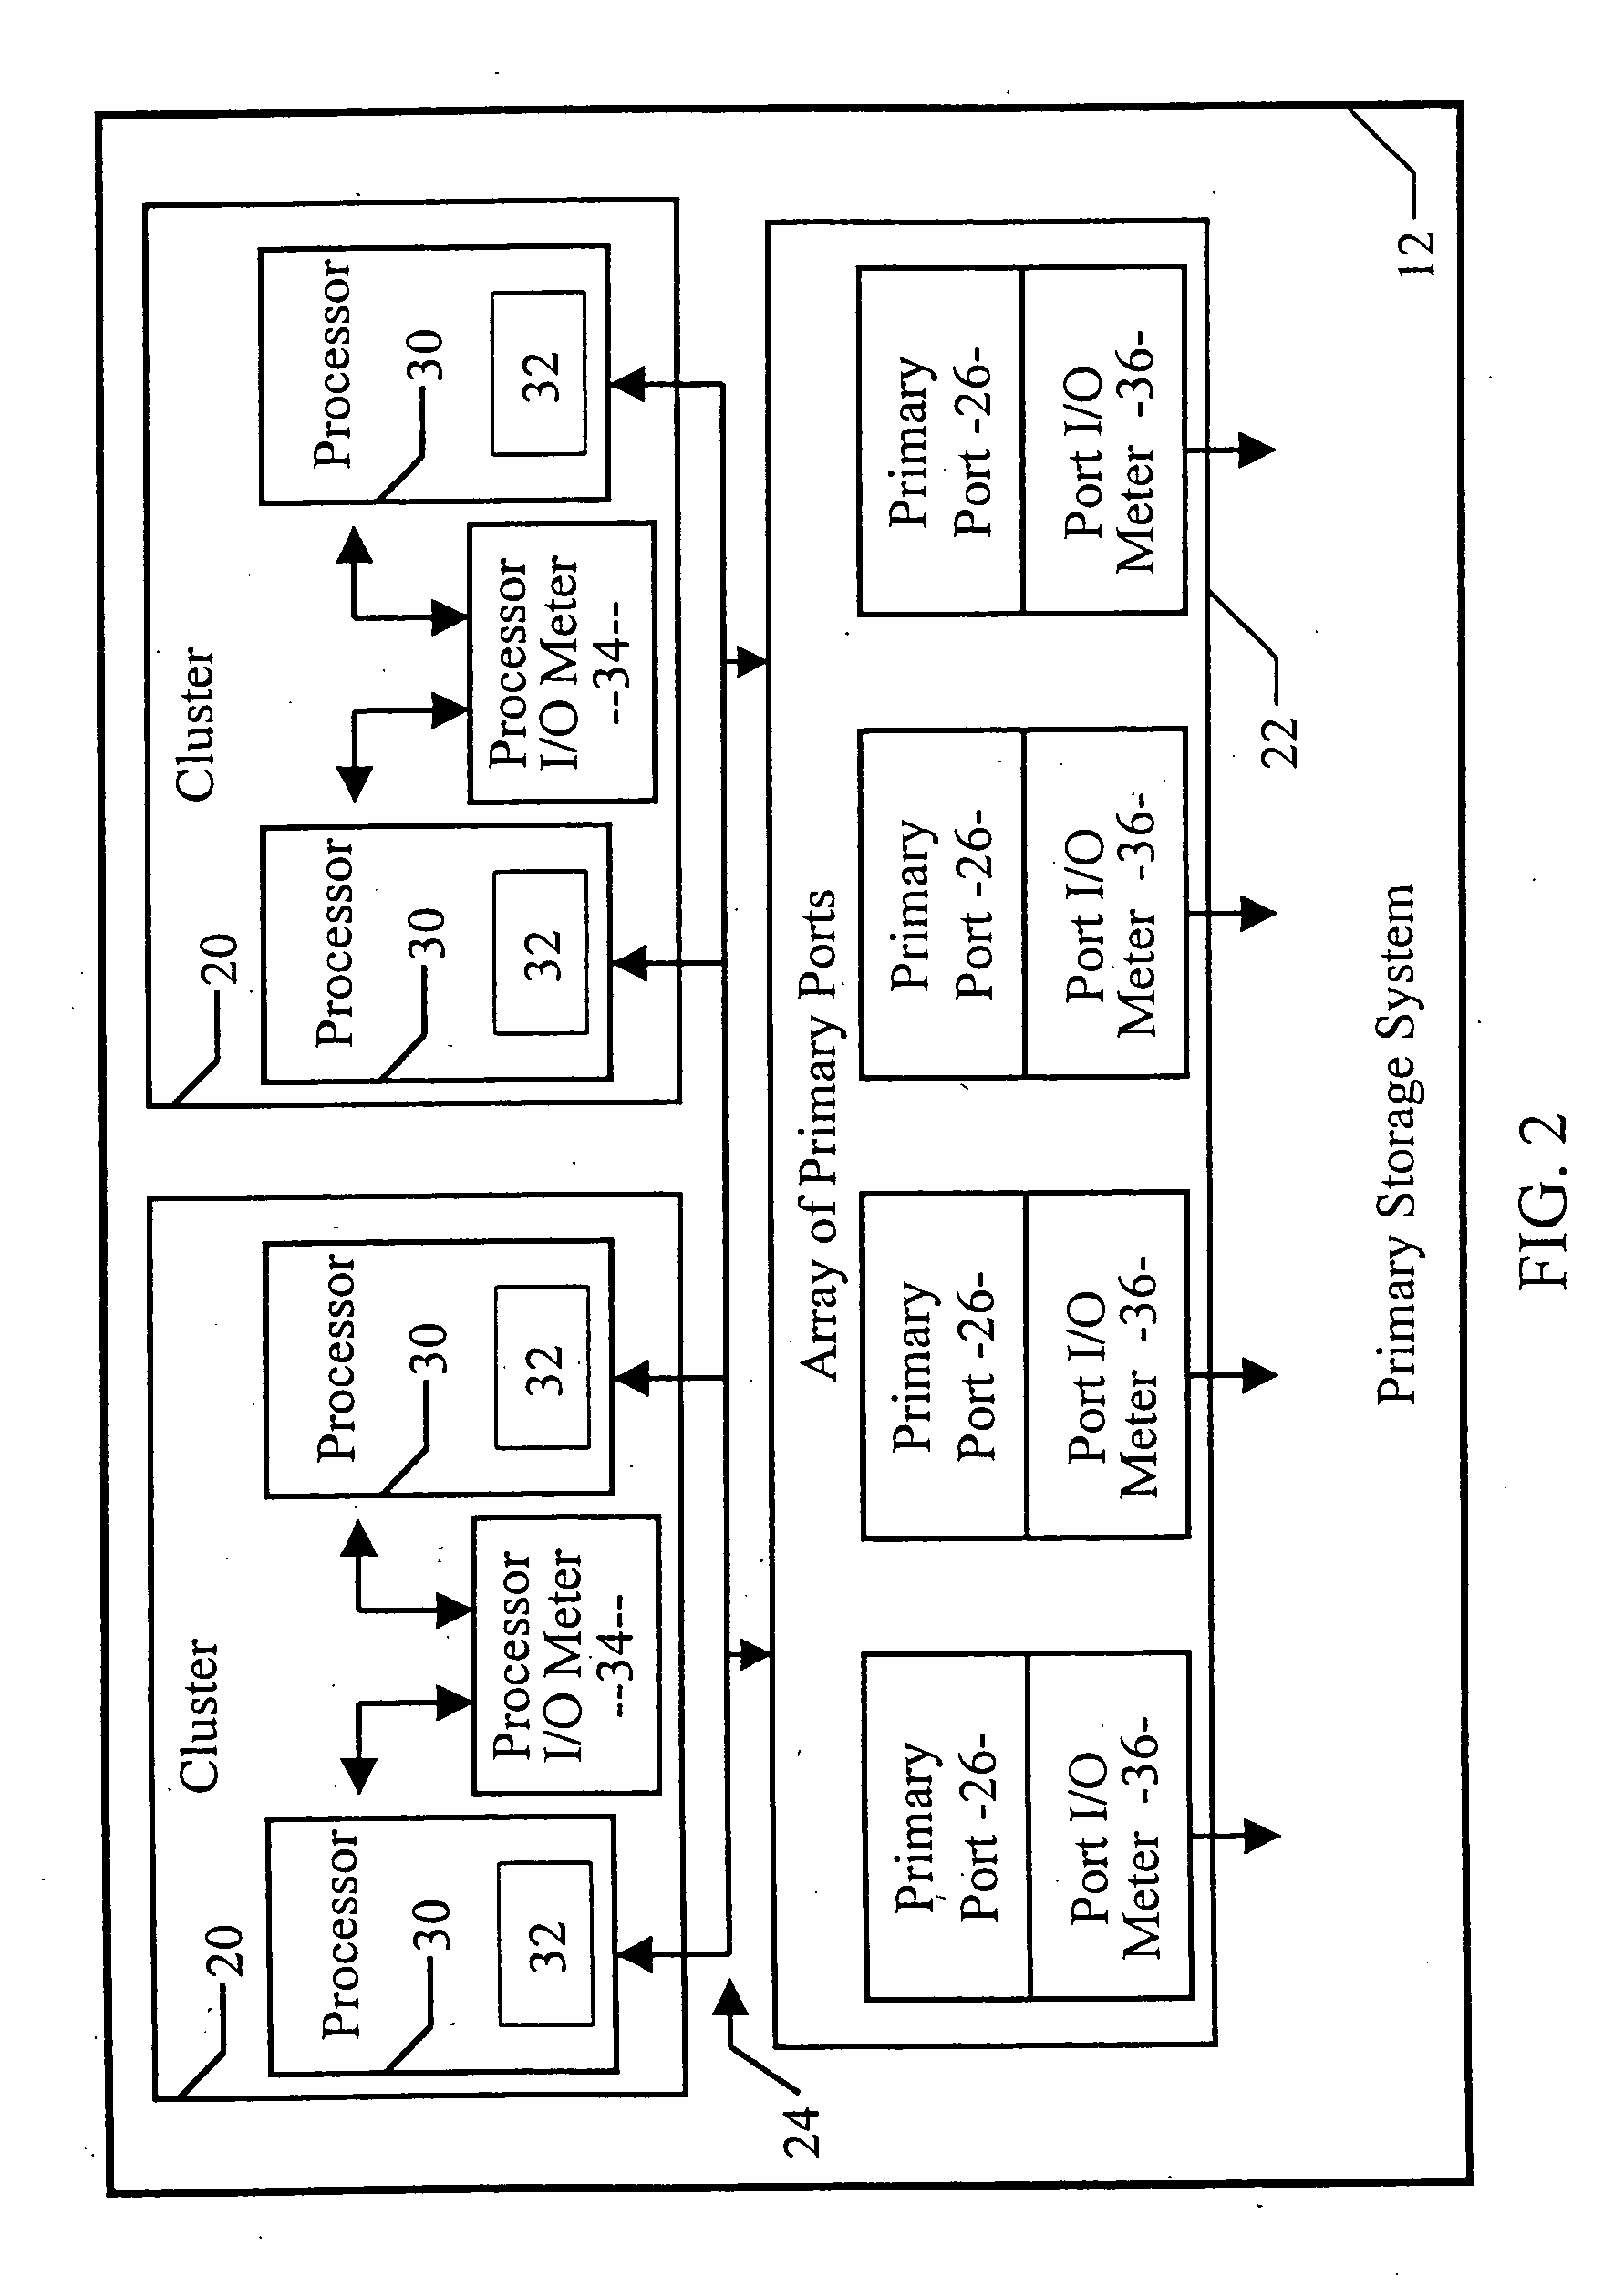 Method of balancing work load with prioritized tasks across a multitude of communication ports